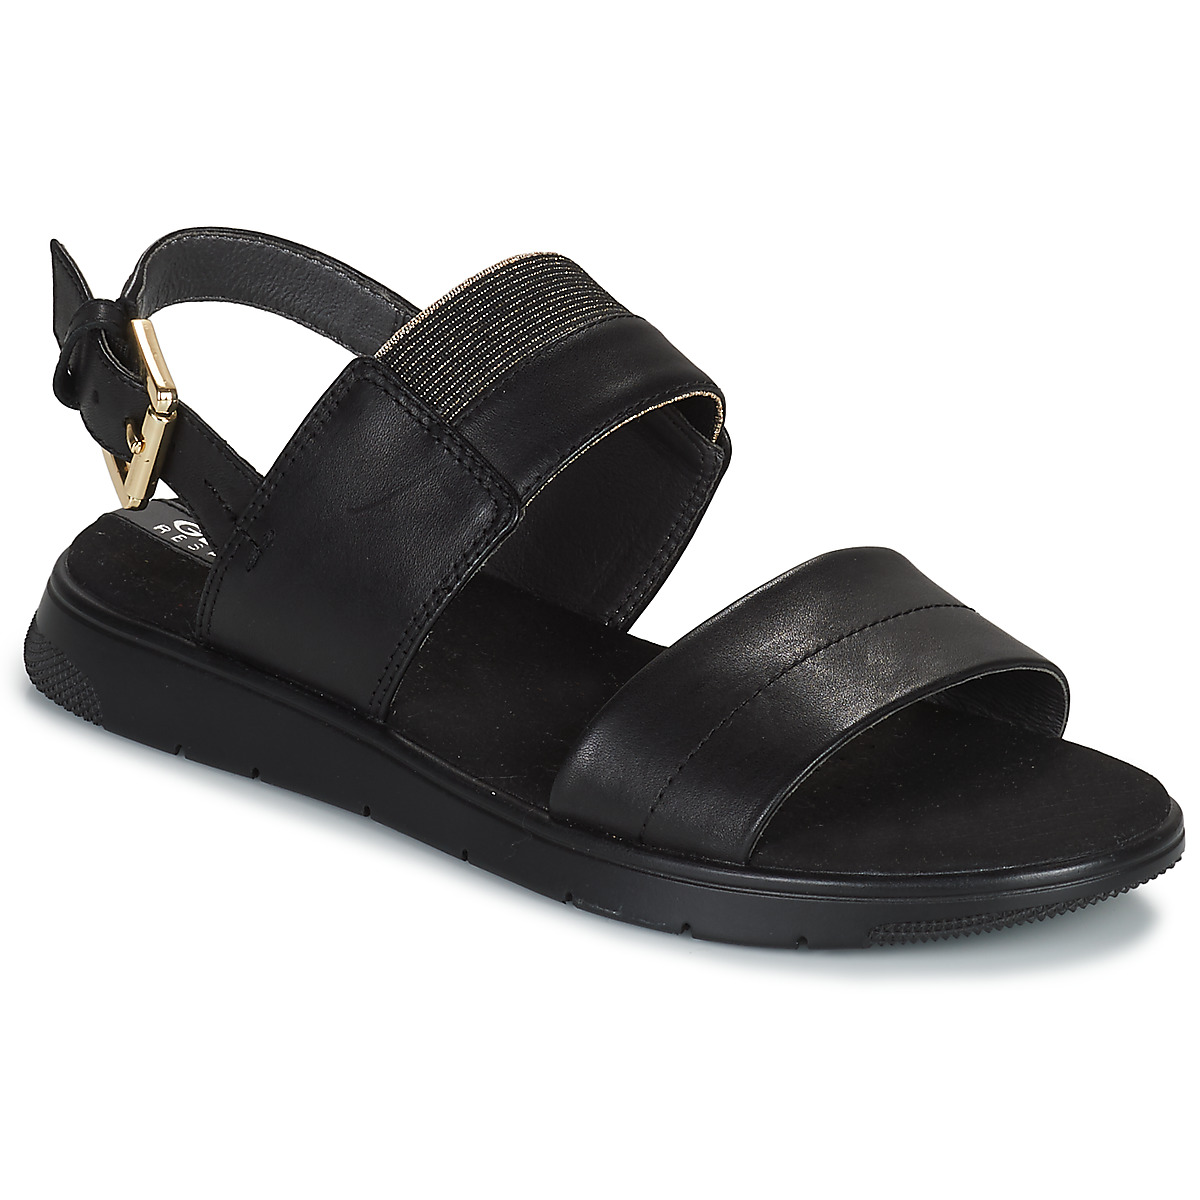 Geox D DANDRA Black - Fast delivery | Europe ! - Shoes Sandals Women 70,40 €